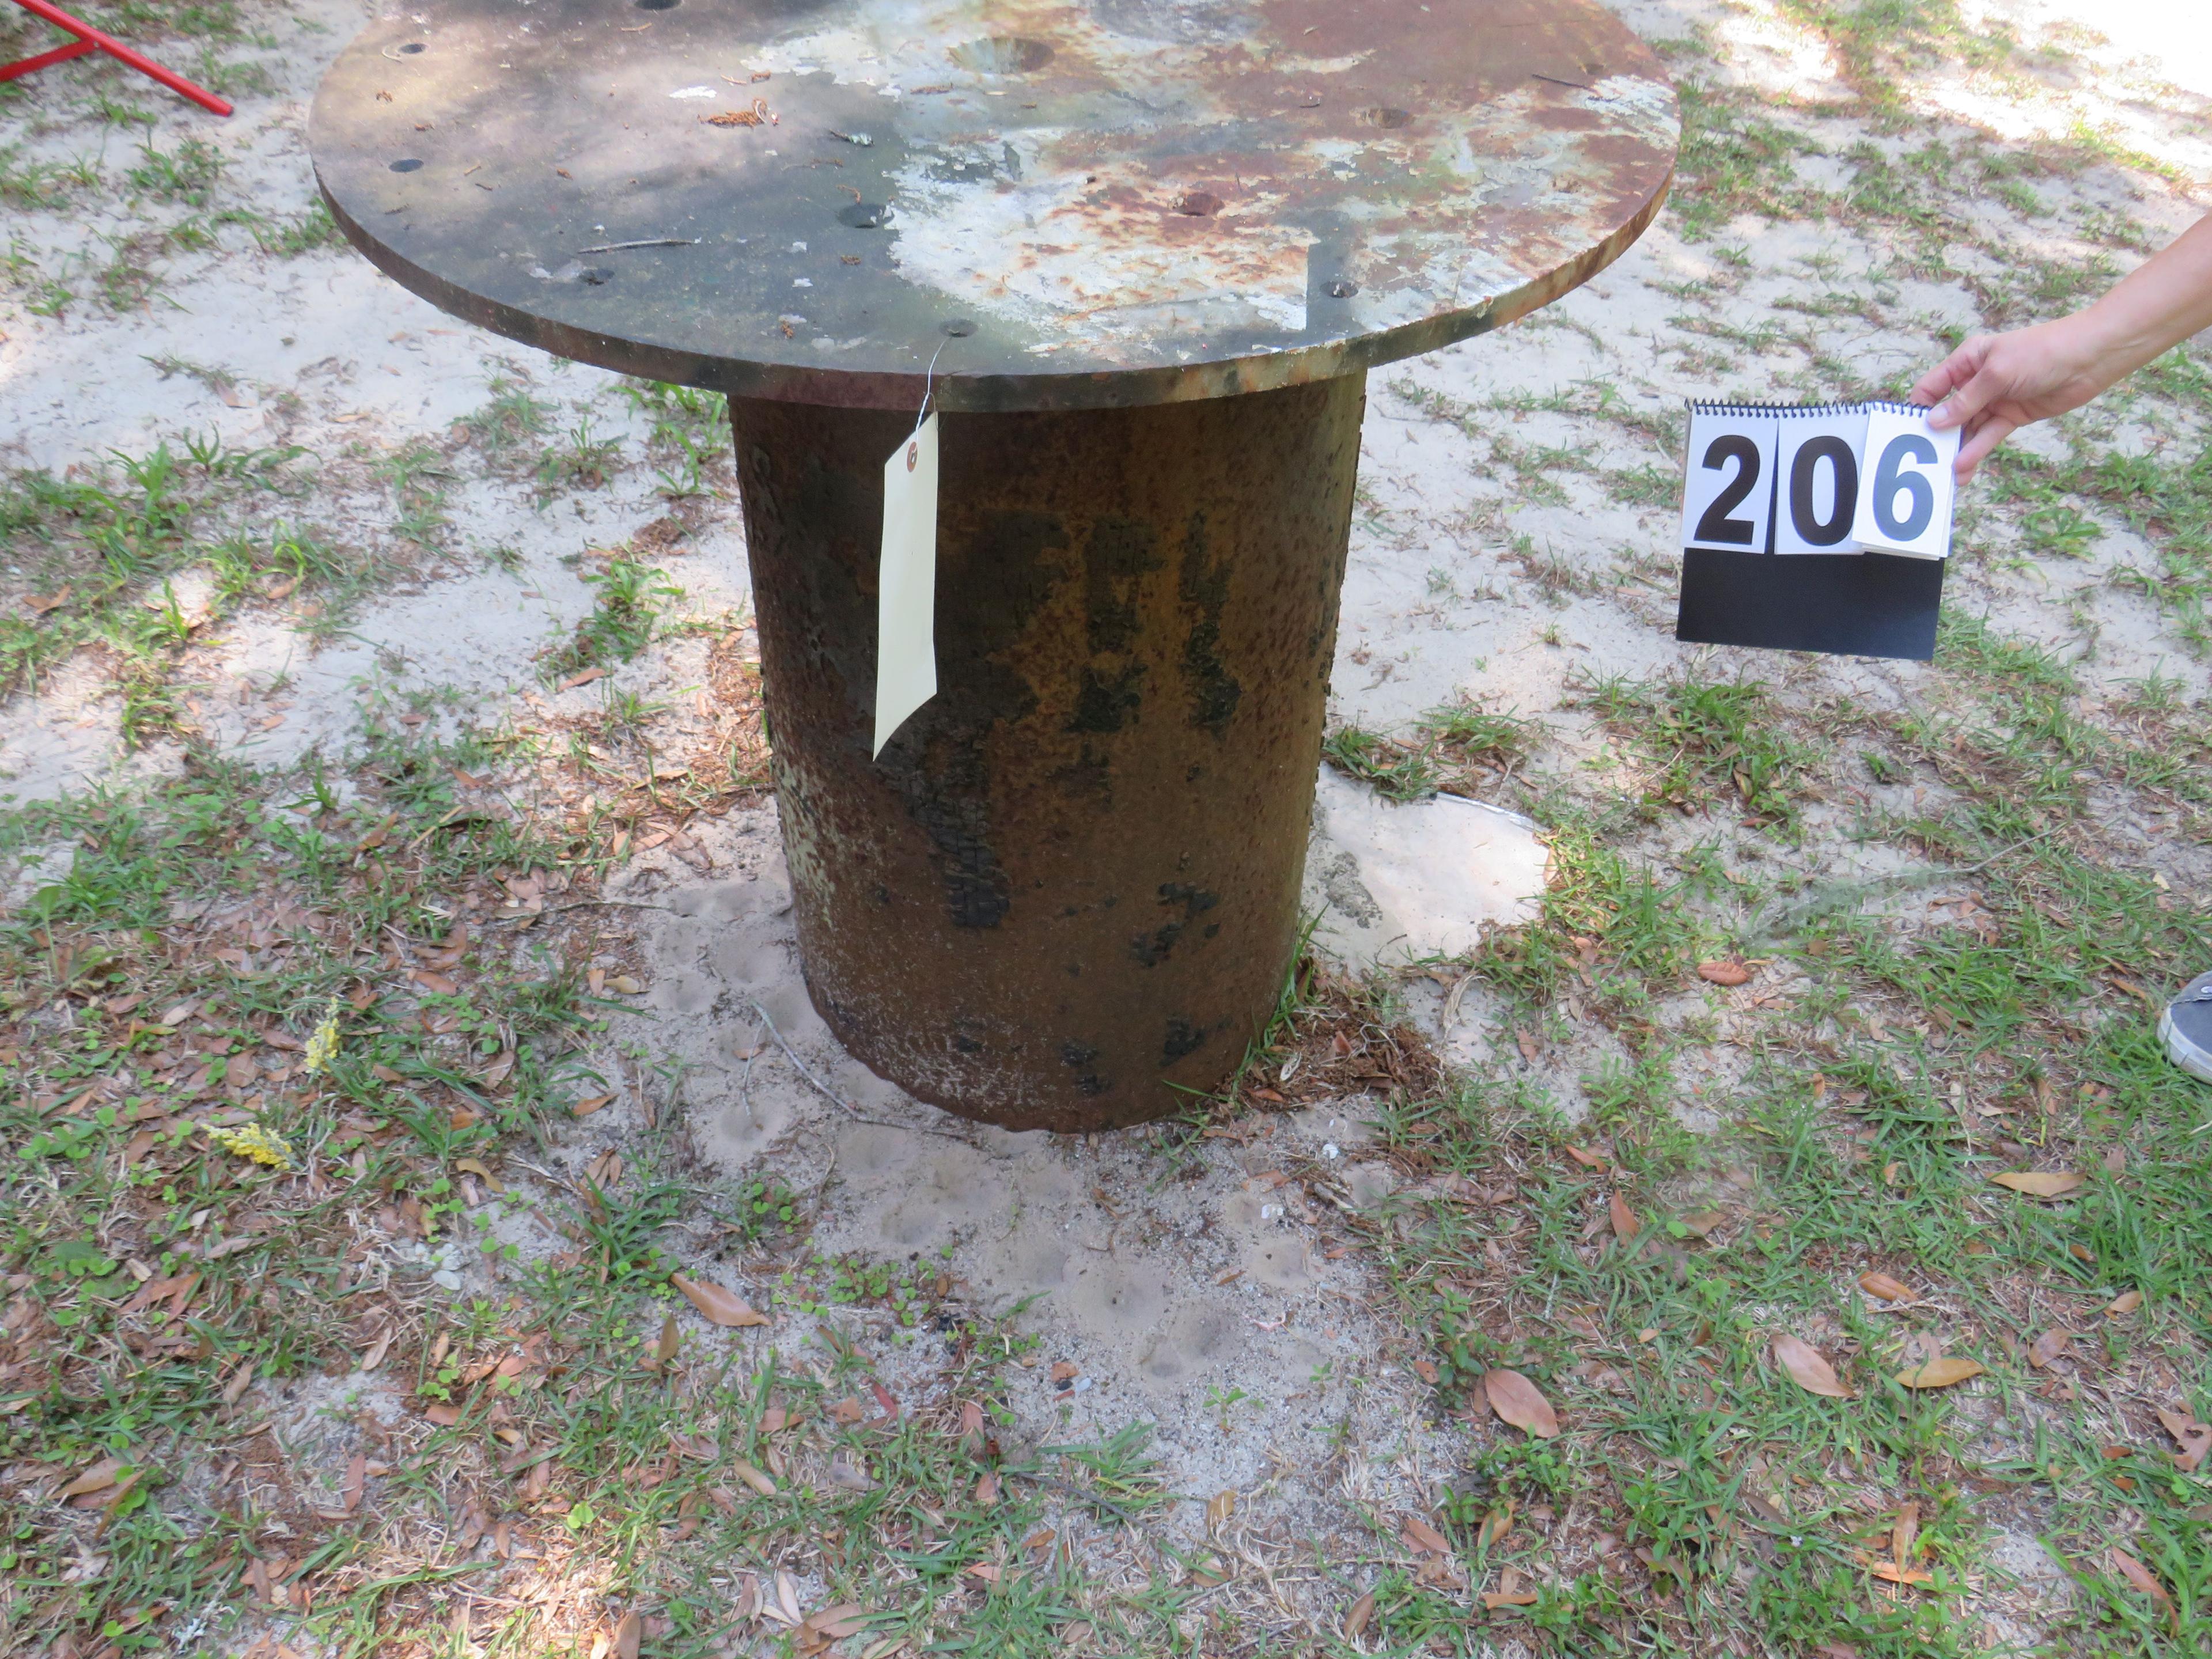 Steel plate, 34" diameter, 1" thick, Cylinder 31"h x 18" diameter (Plate is not welded to pipe) was